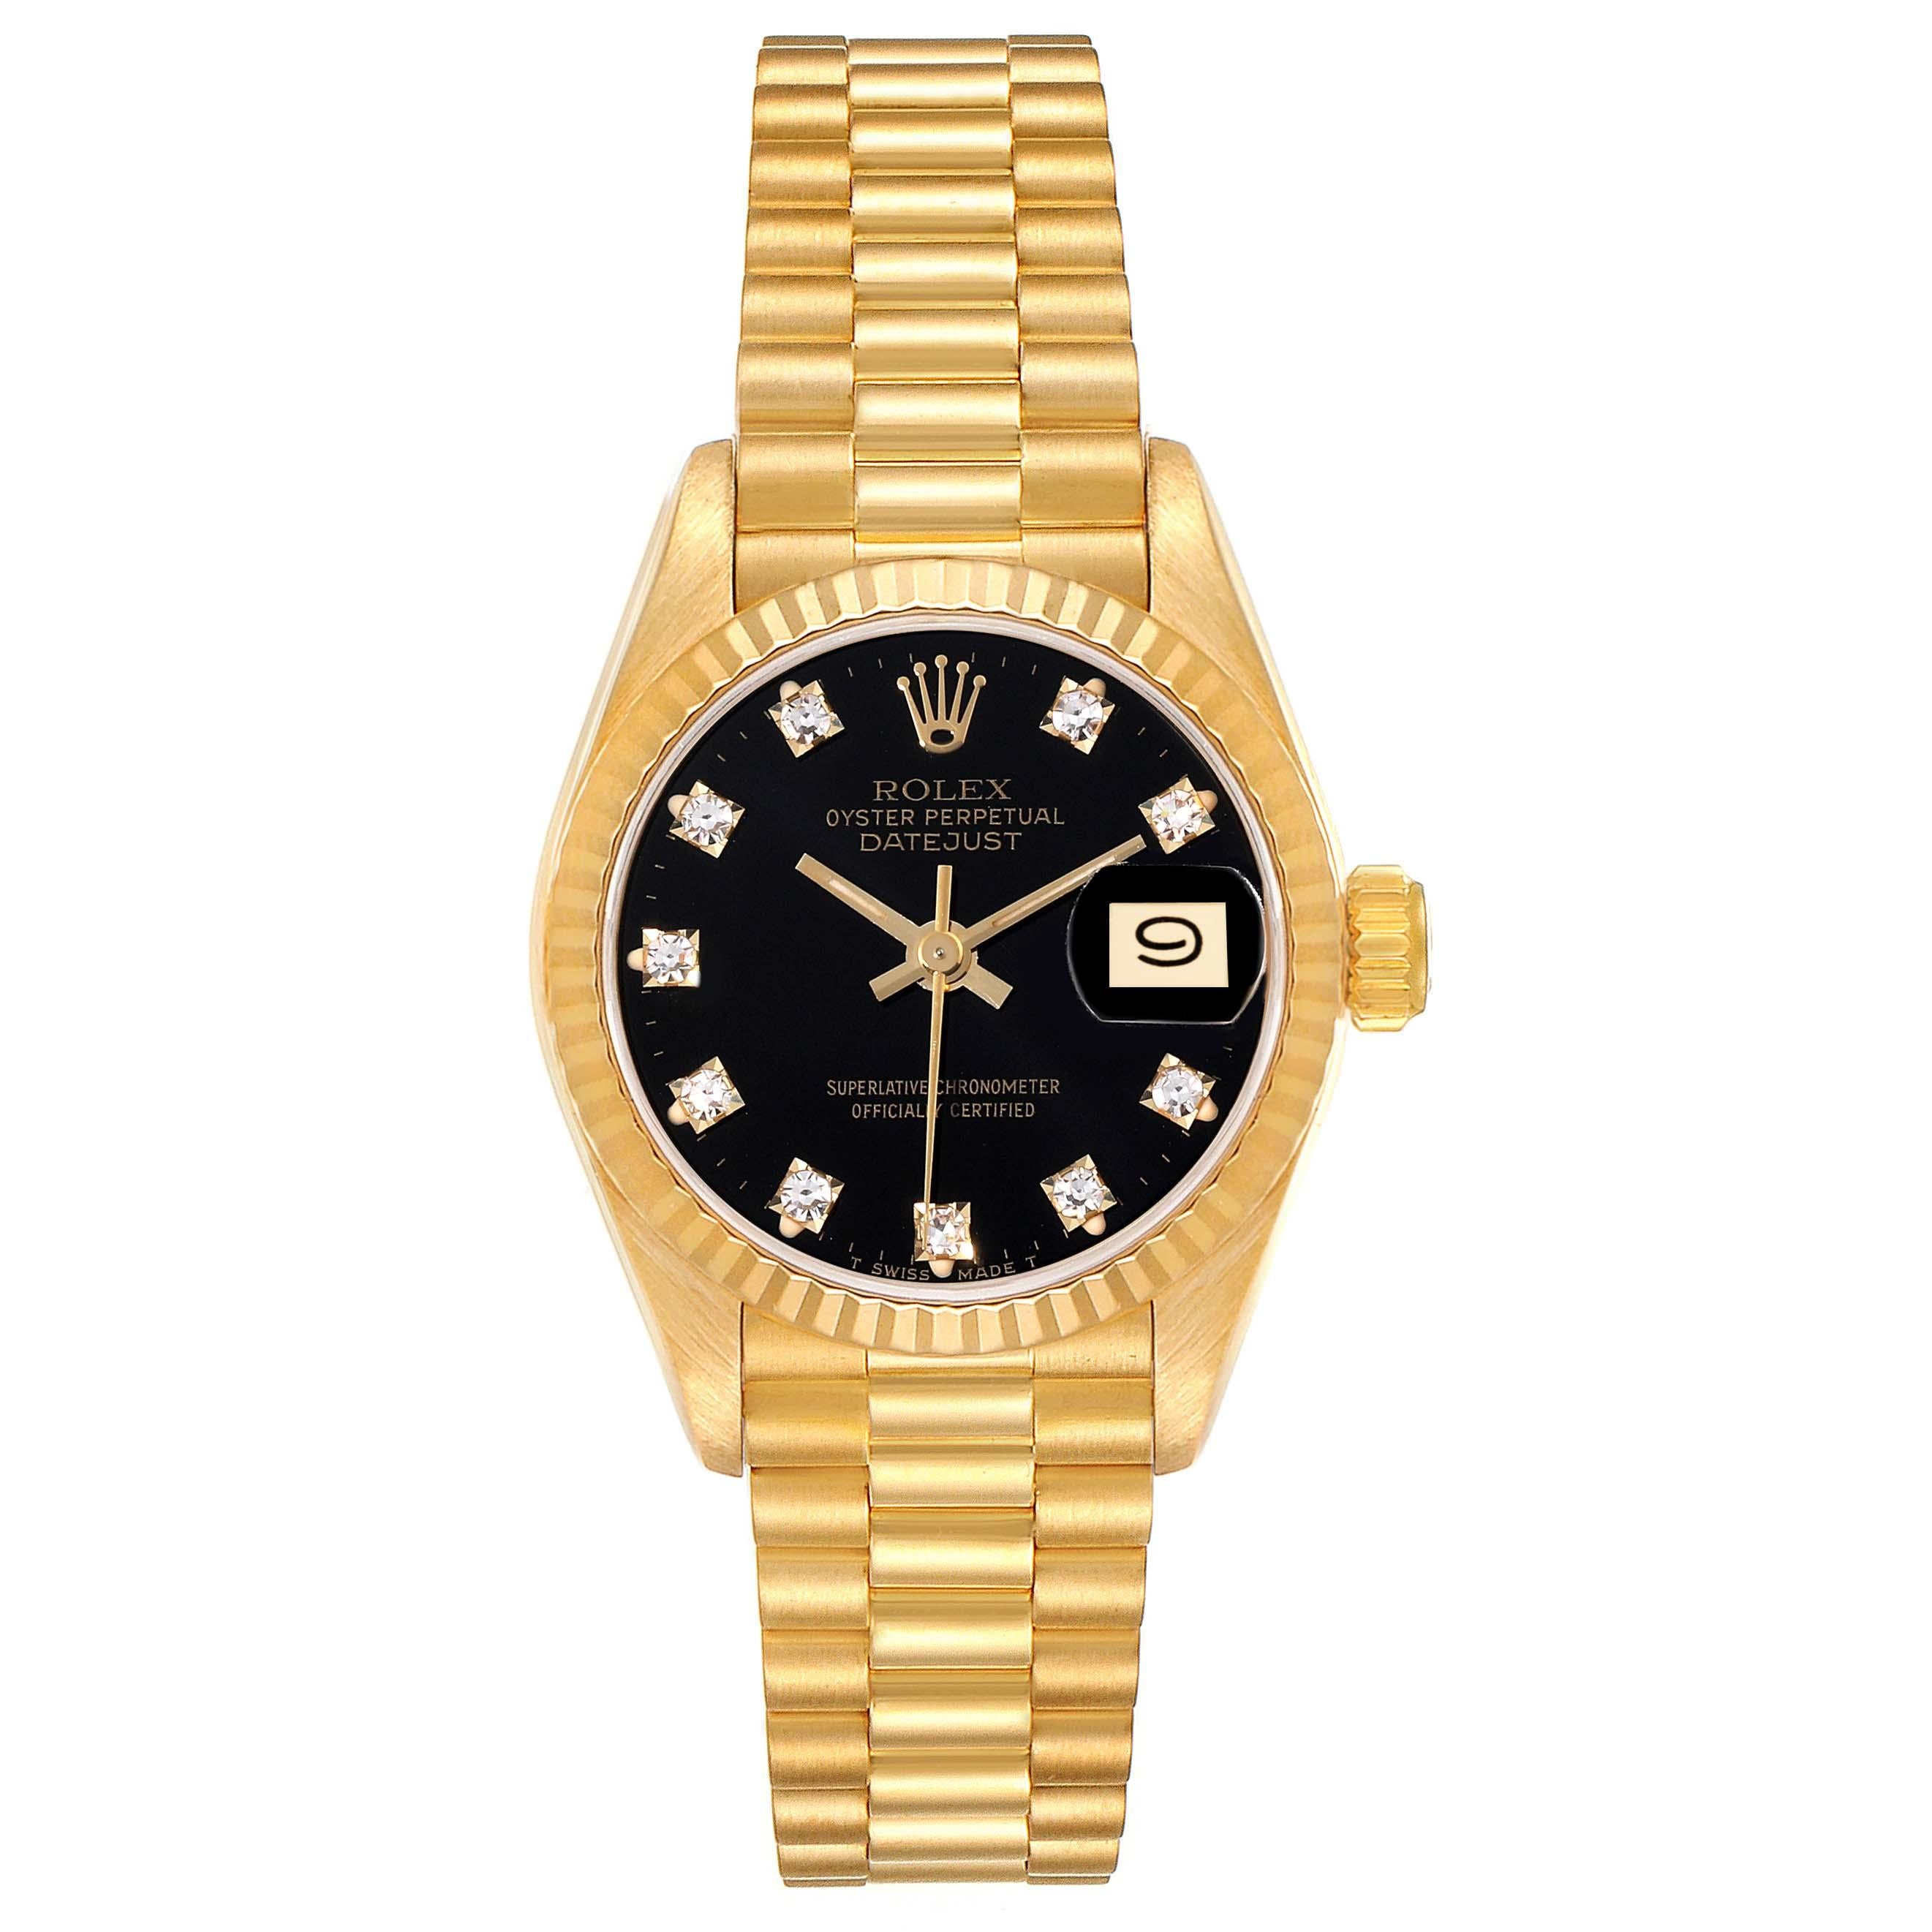 Rolex President Yellow Gold Black Diamond Dial Ladies Watch 69178. Officially certified chronometer automatic self-winding movement. 18k yellow gold oyster case 26.0 mm in diameter. Rolex logo on the crown. 18k yellow gold fluted bezel. Scratch